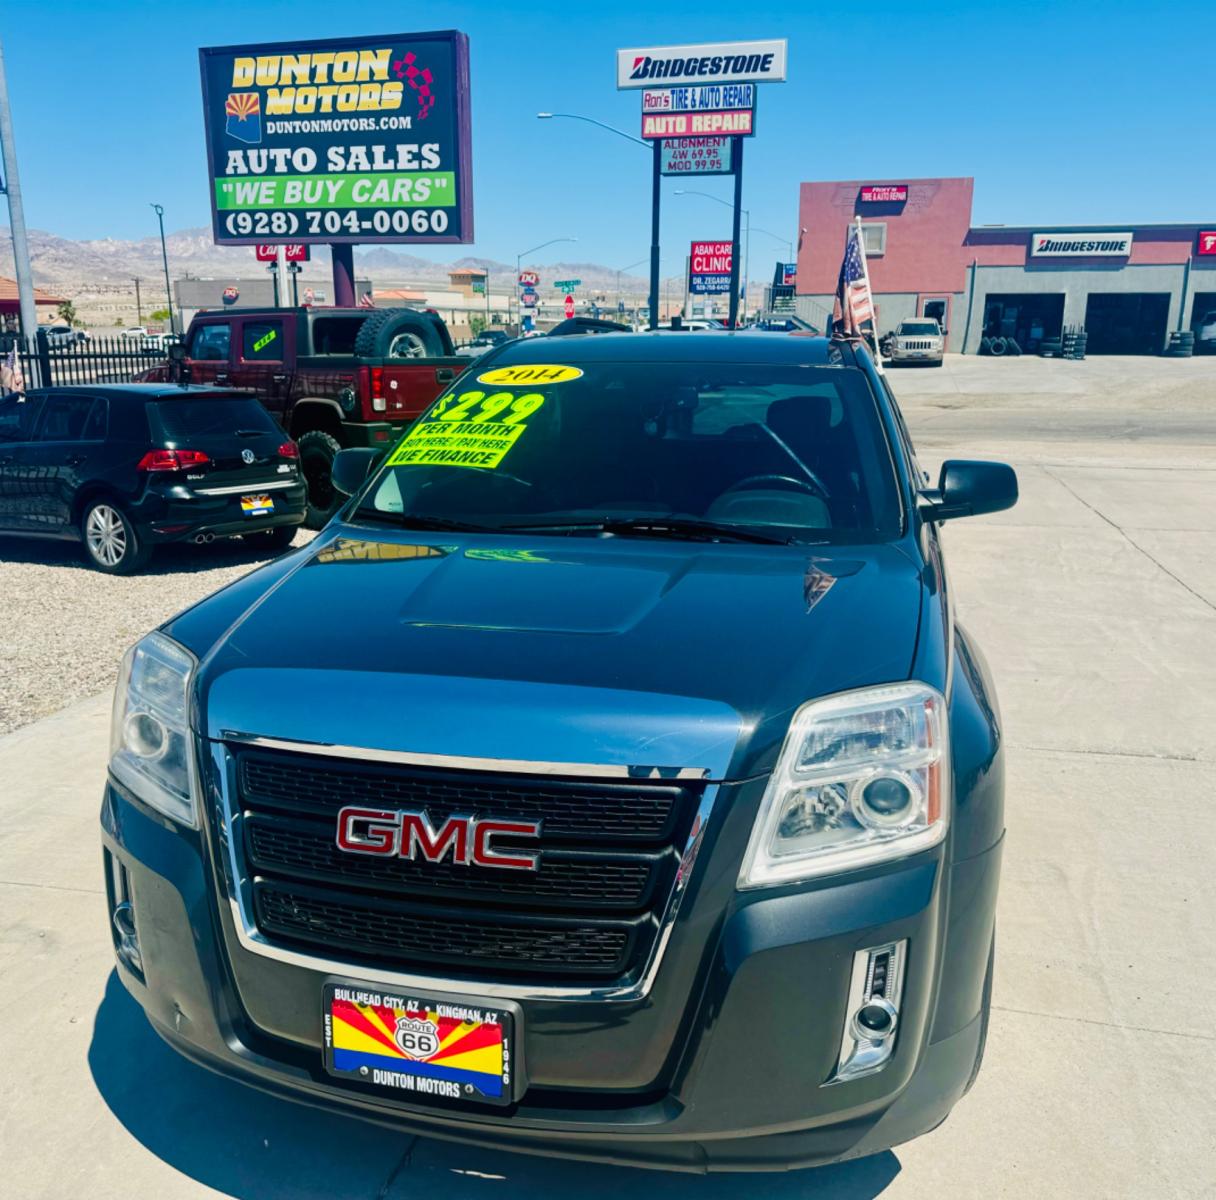 2014 grey GMC Terrain (2GKALSEK1E6) , located at 2190 Hwy 95, Bullhead City, AZ, 86442, (928) 704-0060, 0.000000, 0.000000 - 2014 GMC Terrain SLT-1. In house financing 93k miles. Brand new tires. completely safety and serviced. Buy Here pay Here. we finance. runs great. Free carfax. Free warranty. - Photo #1